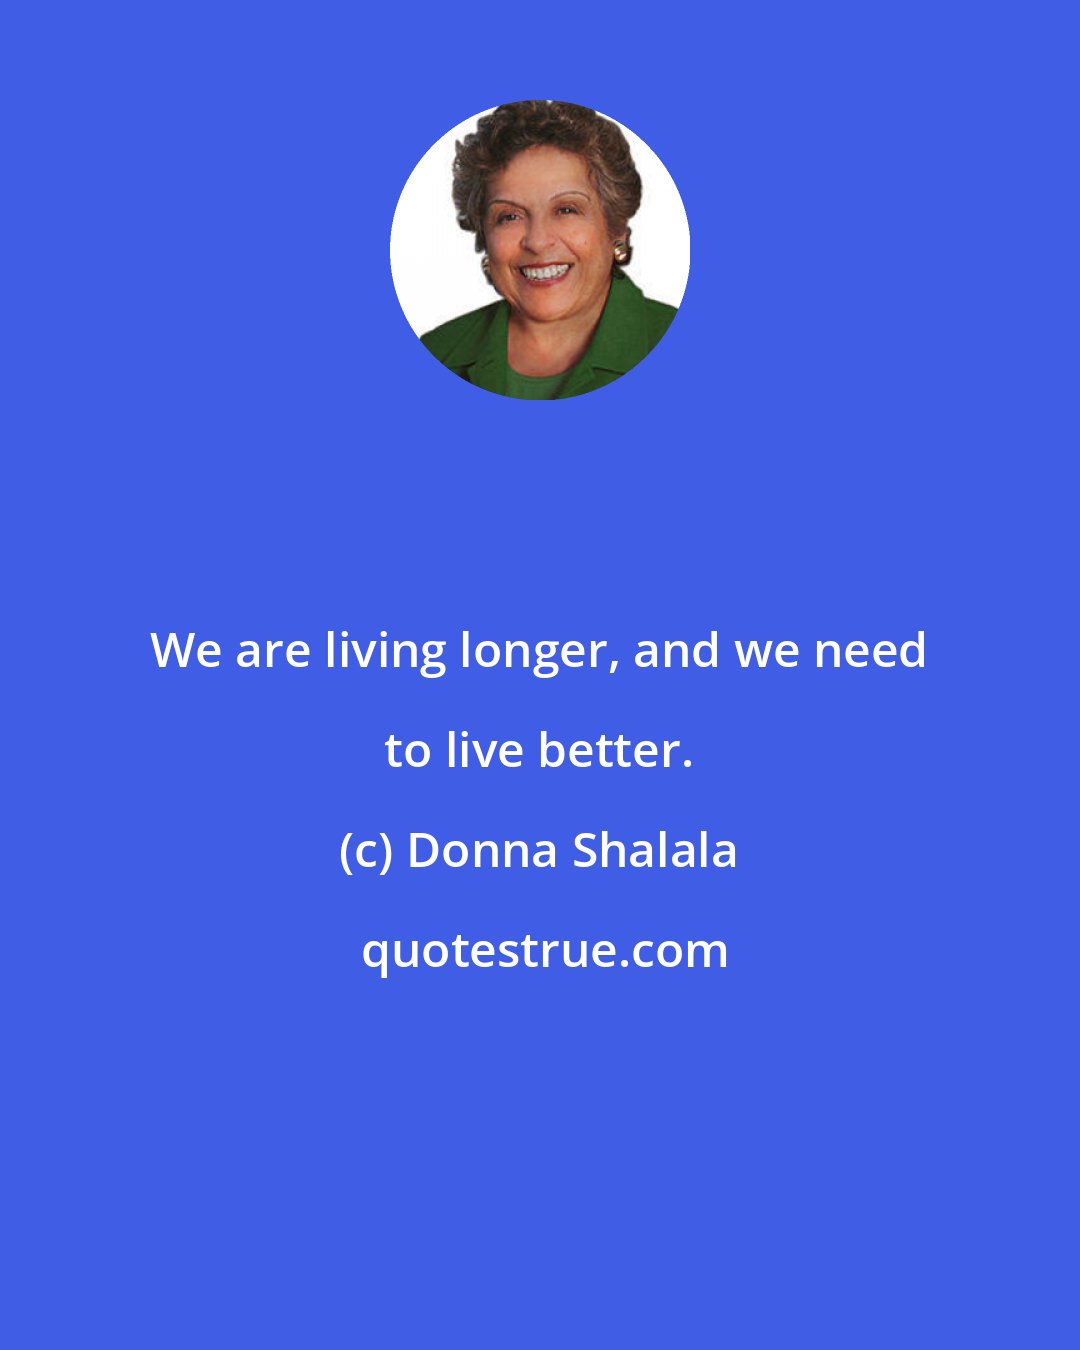 Donna Shalala: We are living longer, and we need to live better.